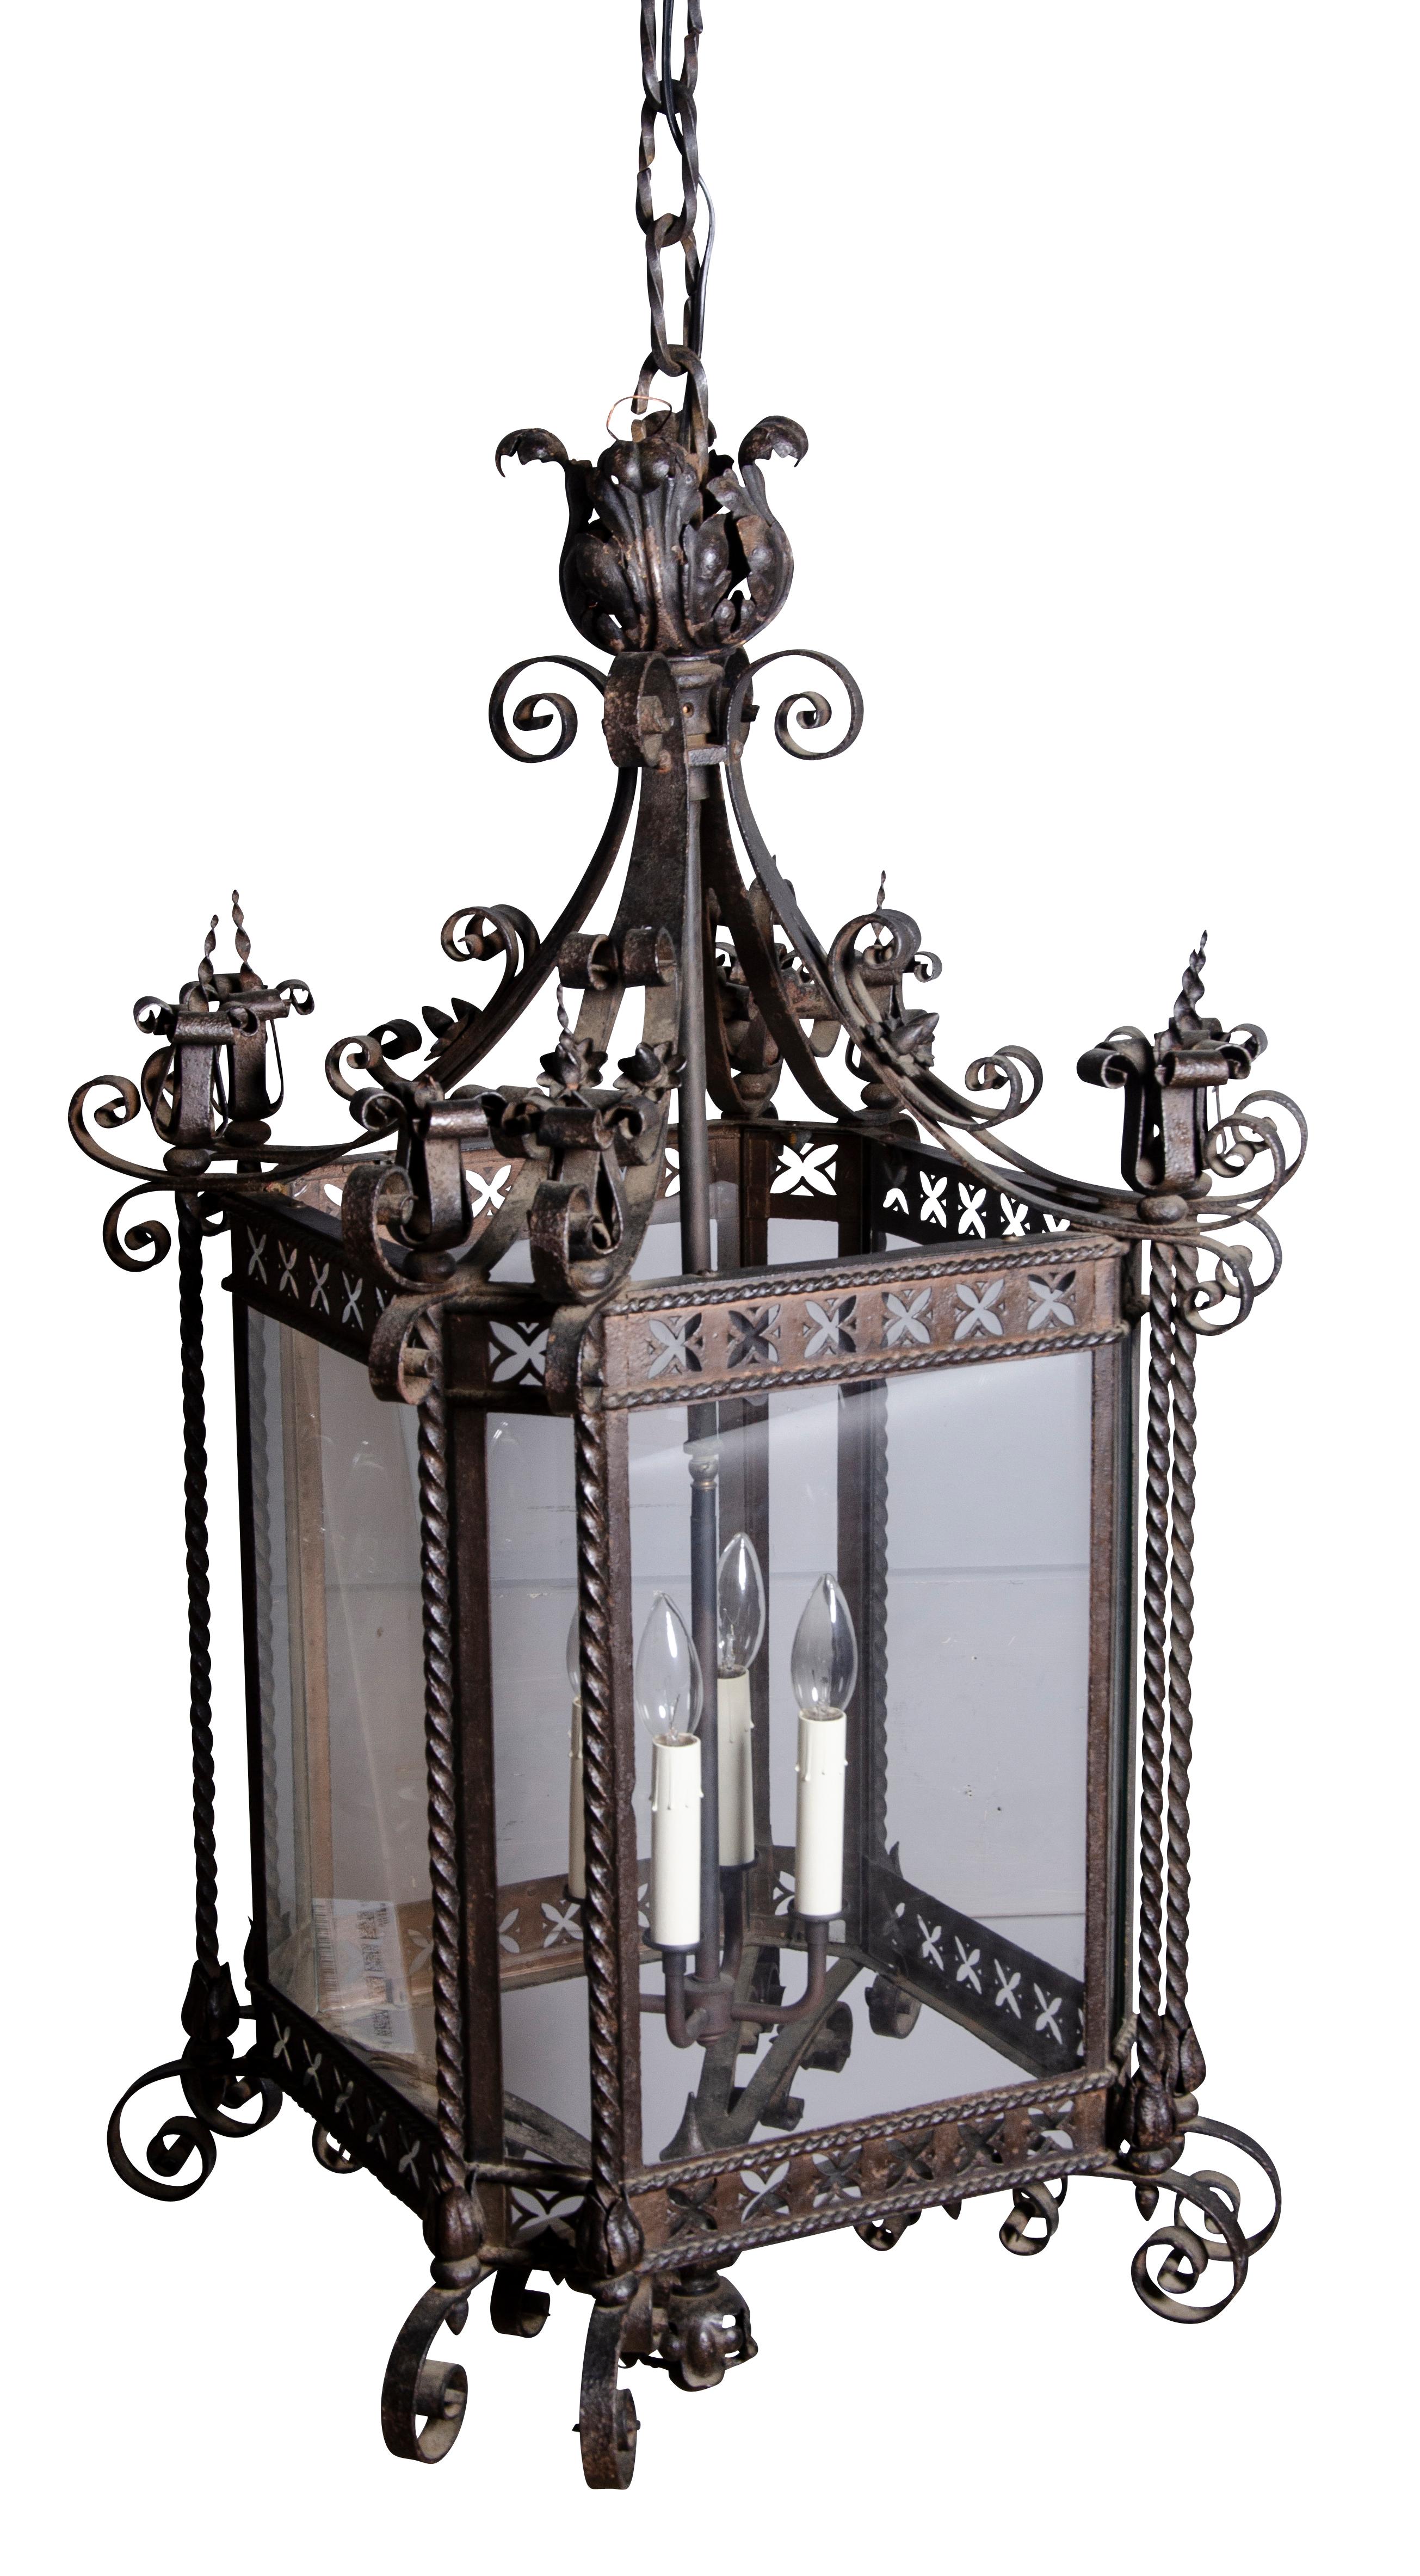 Great quality and size with nicely detailed metalwork. Electrified with four lights , glass paneled sides.